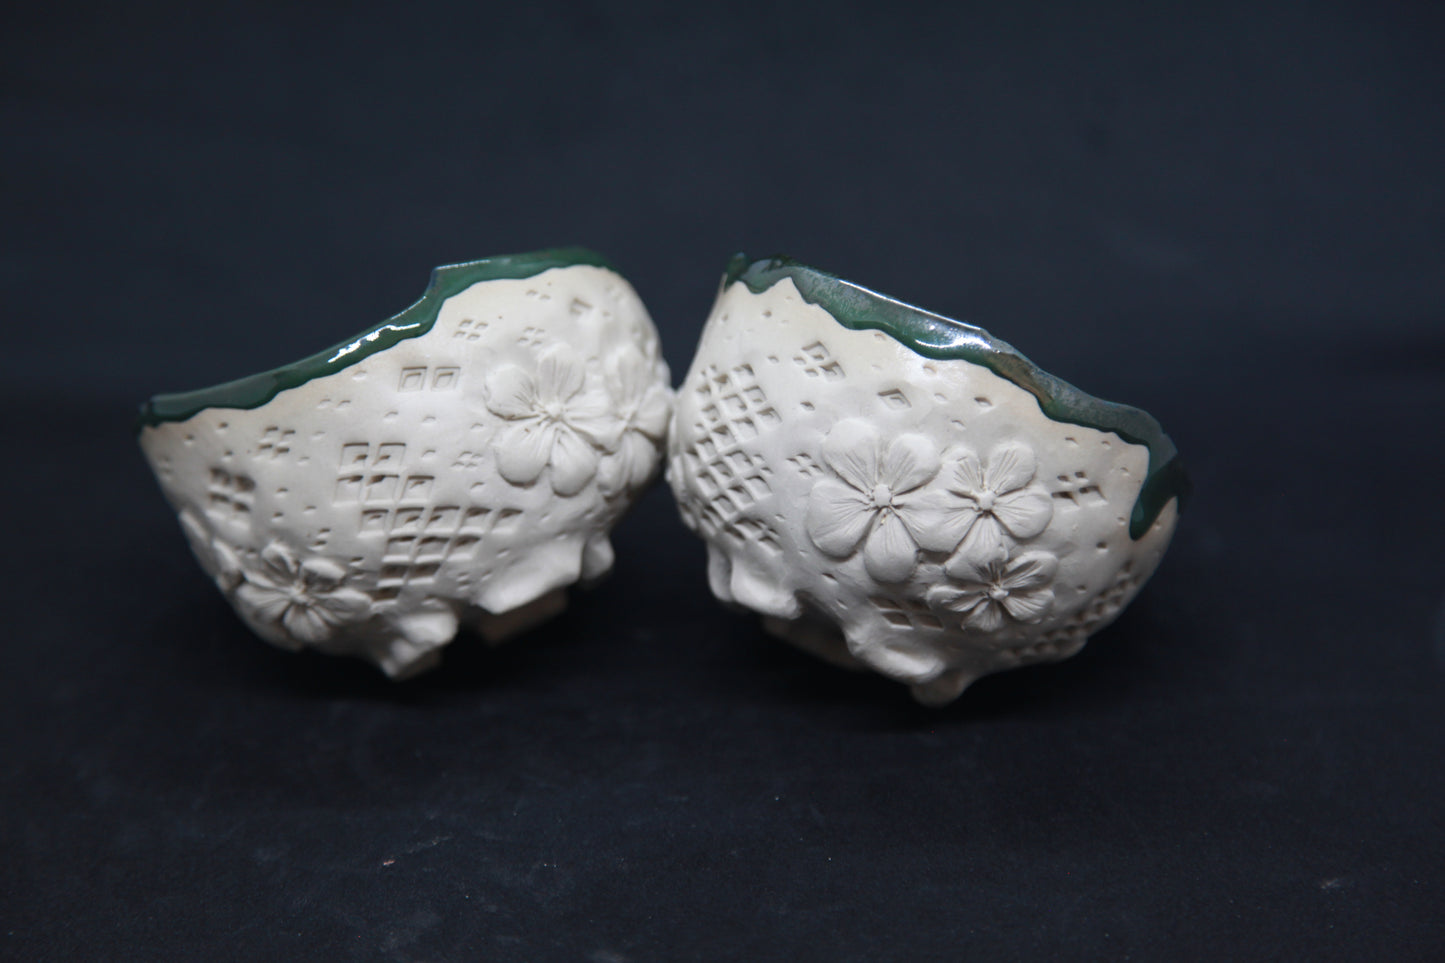 Metal green cups on white clay - flower patterns